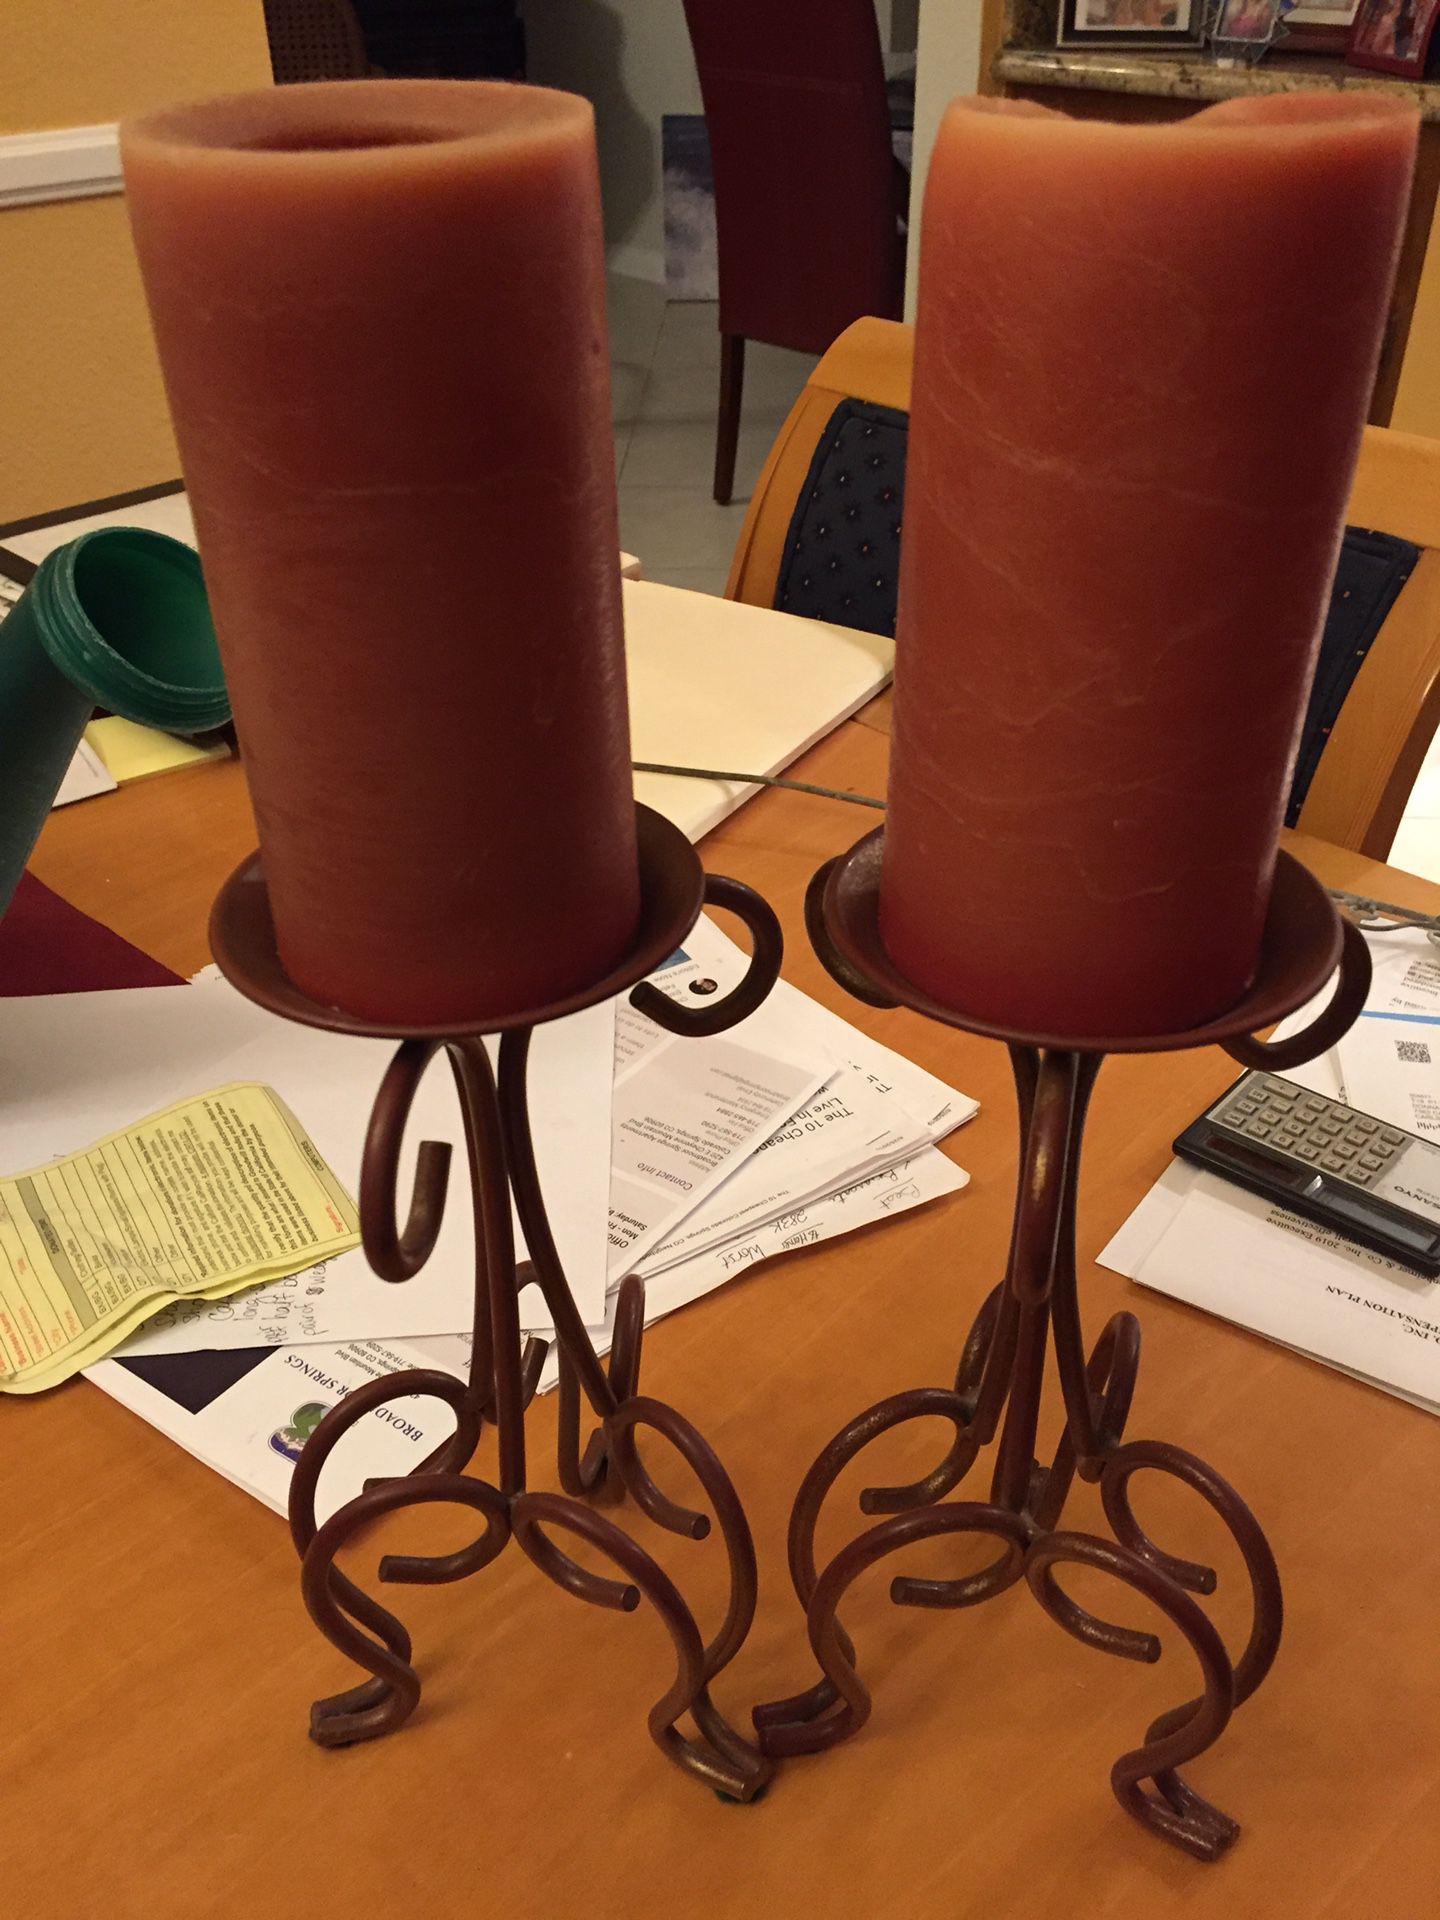 2 candle holders with candles - $7 for both